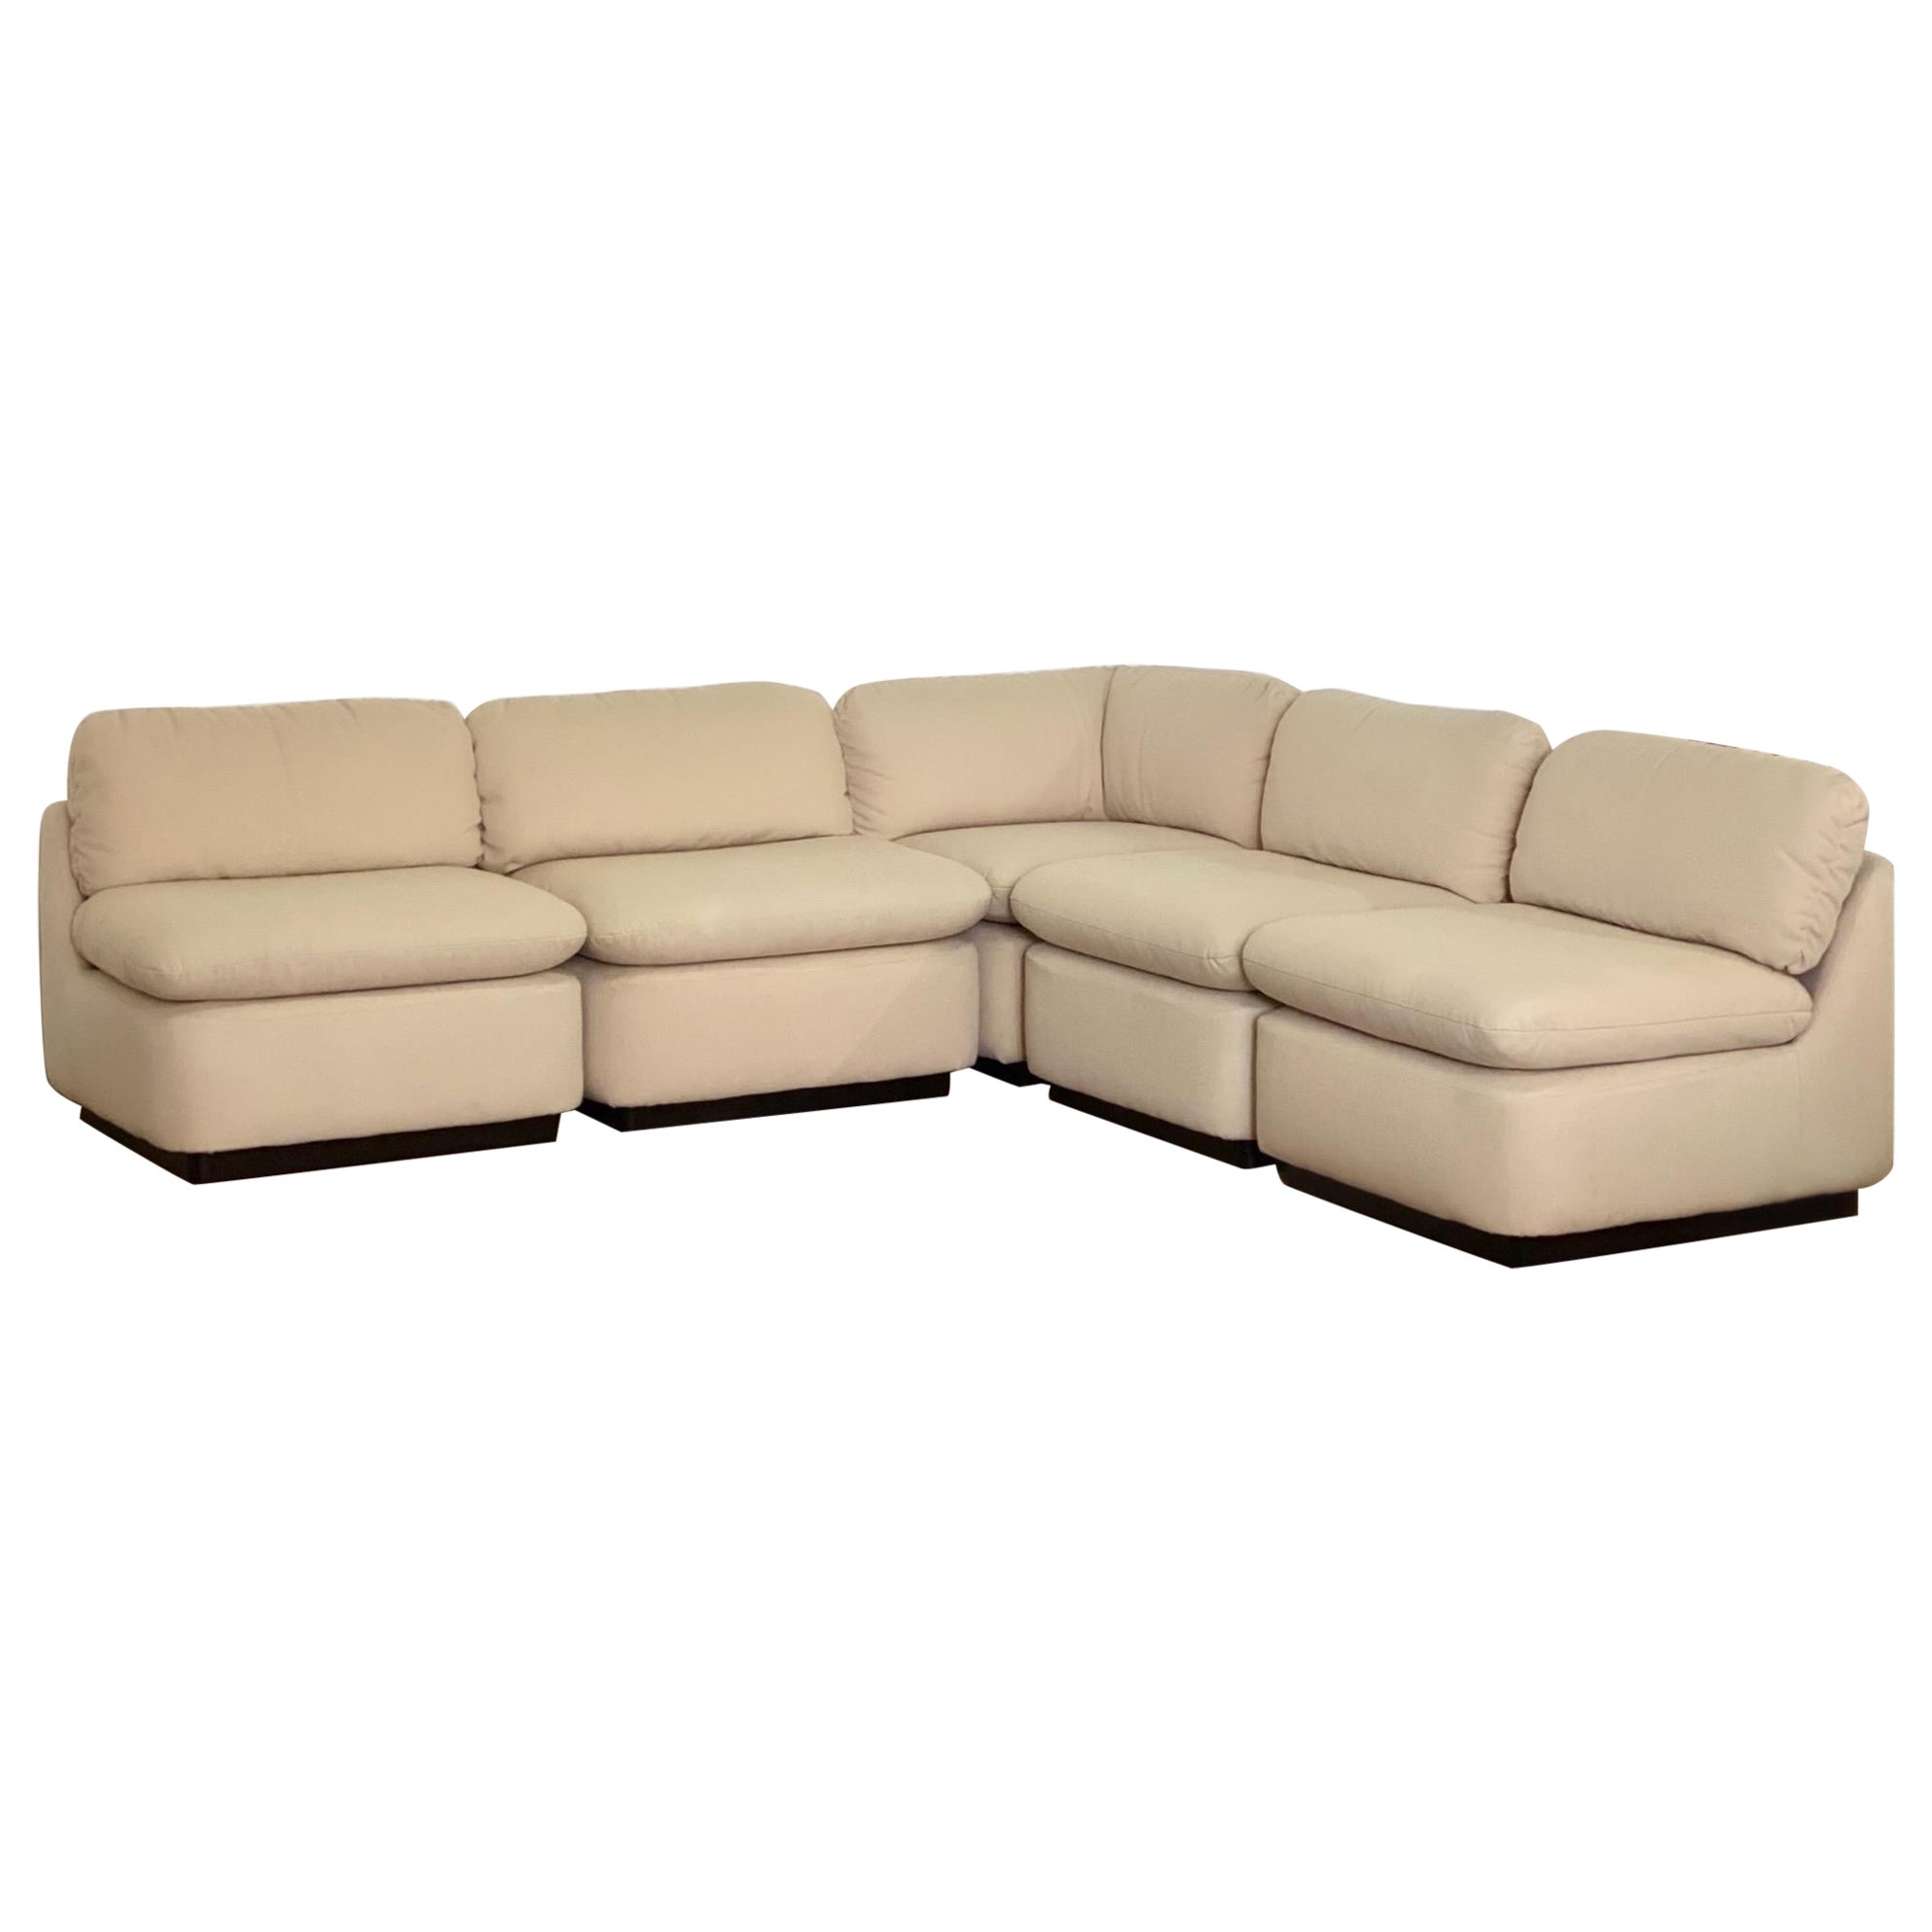 1990 Directional White Ivory Five Piece Modular Lounge Sectional - 5 Pieces en vente